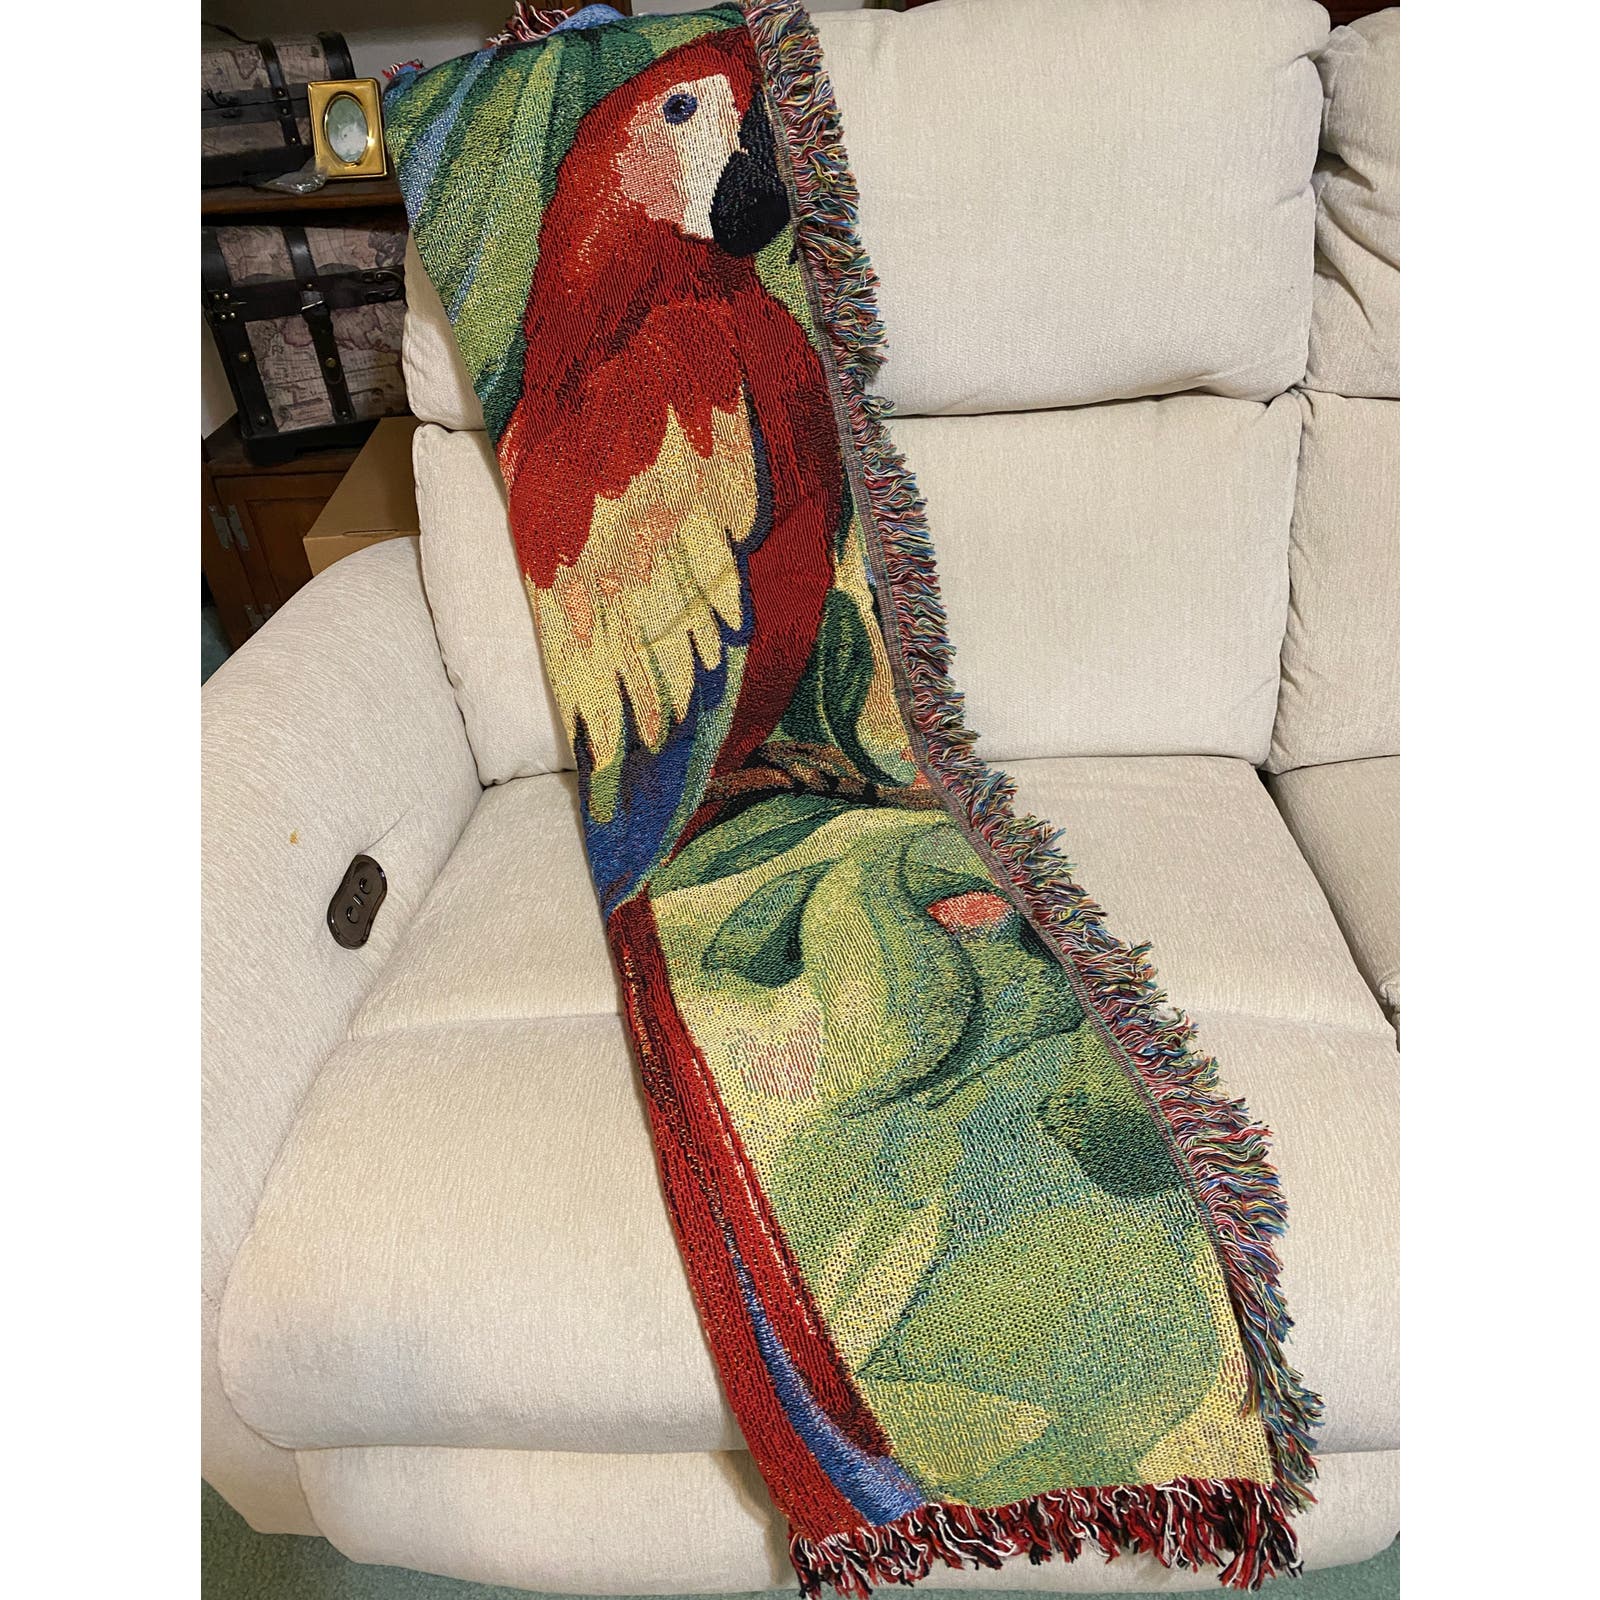 Macaw Parrott Throw Blanket Decorative Cotton Tapestry Tropical Red 50x60" NEW